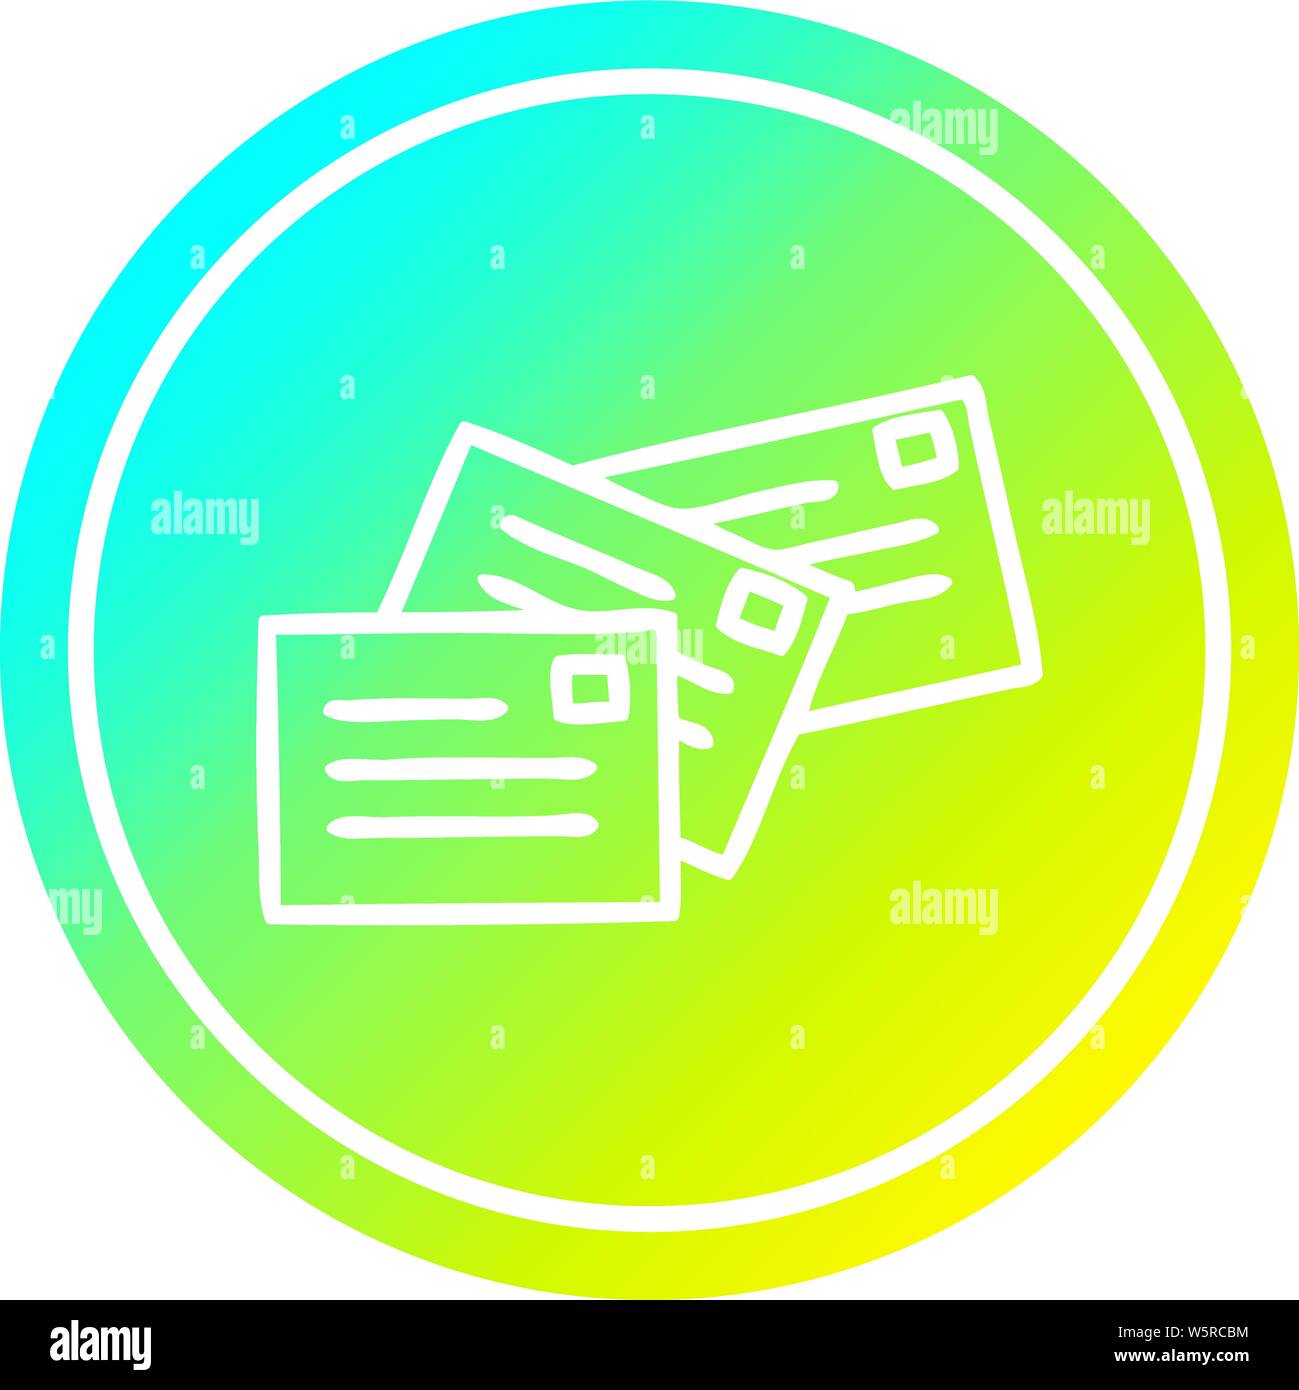 stack of letters circular icon with cool gradient finish Stock Vector